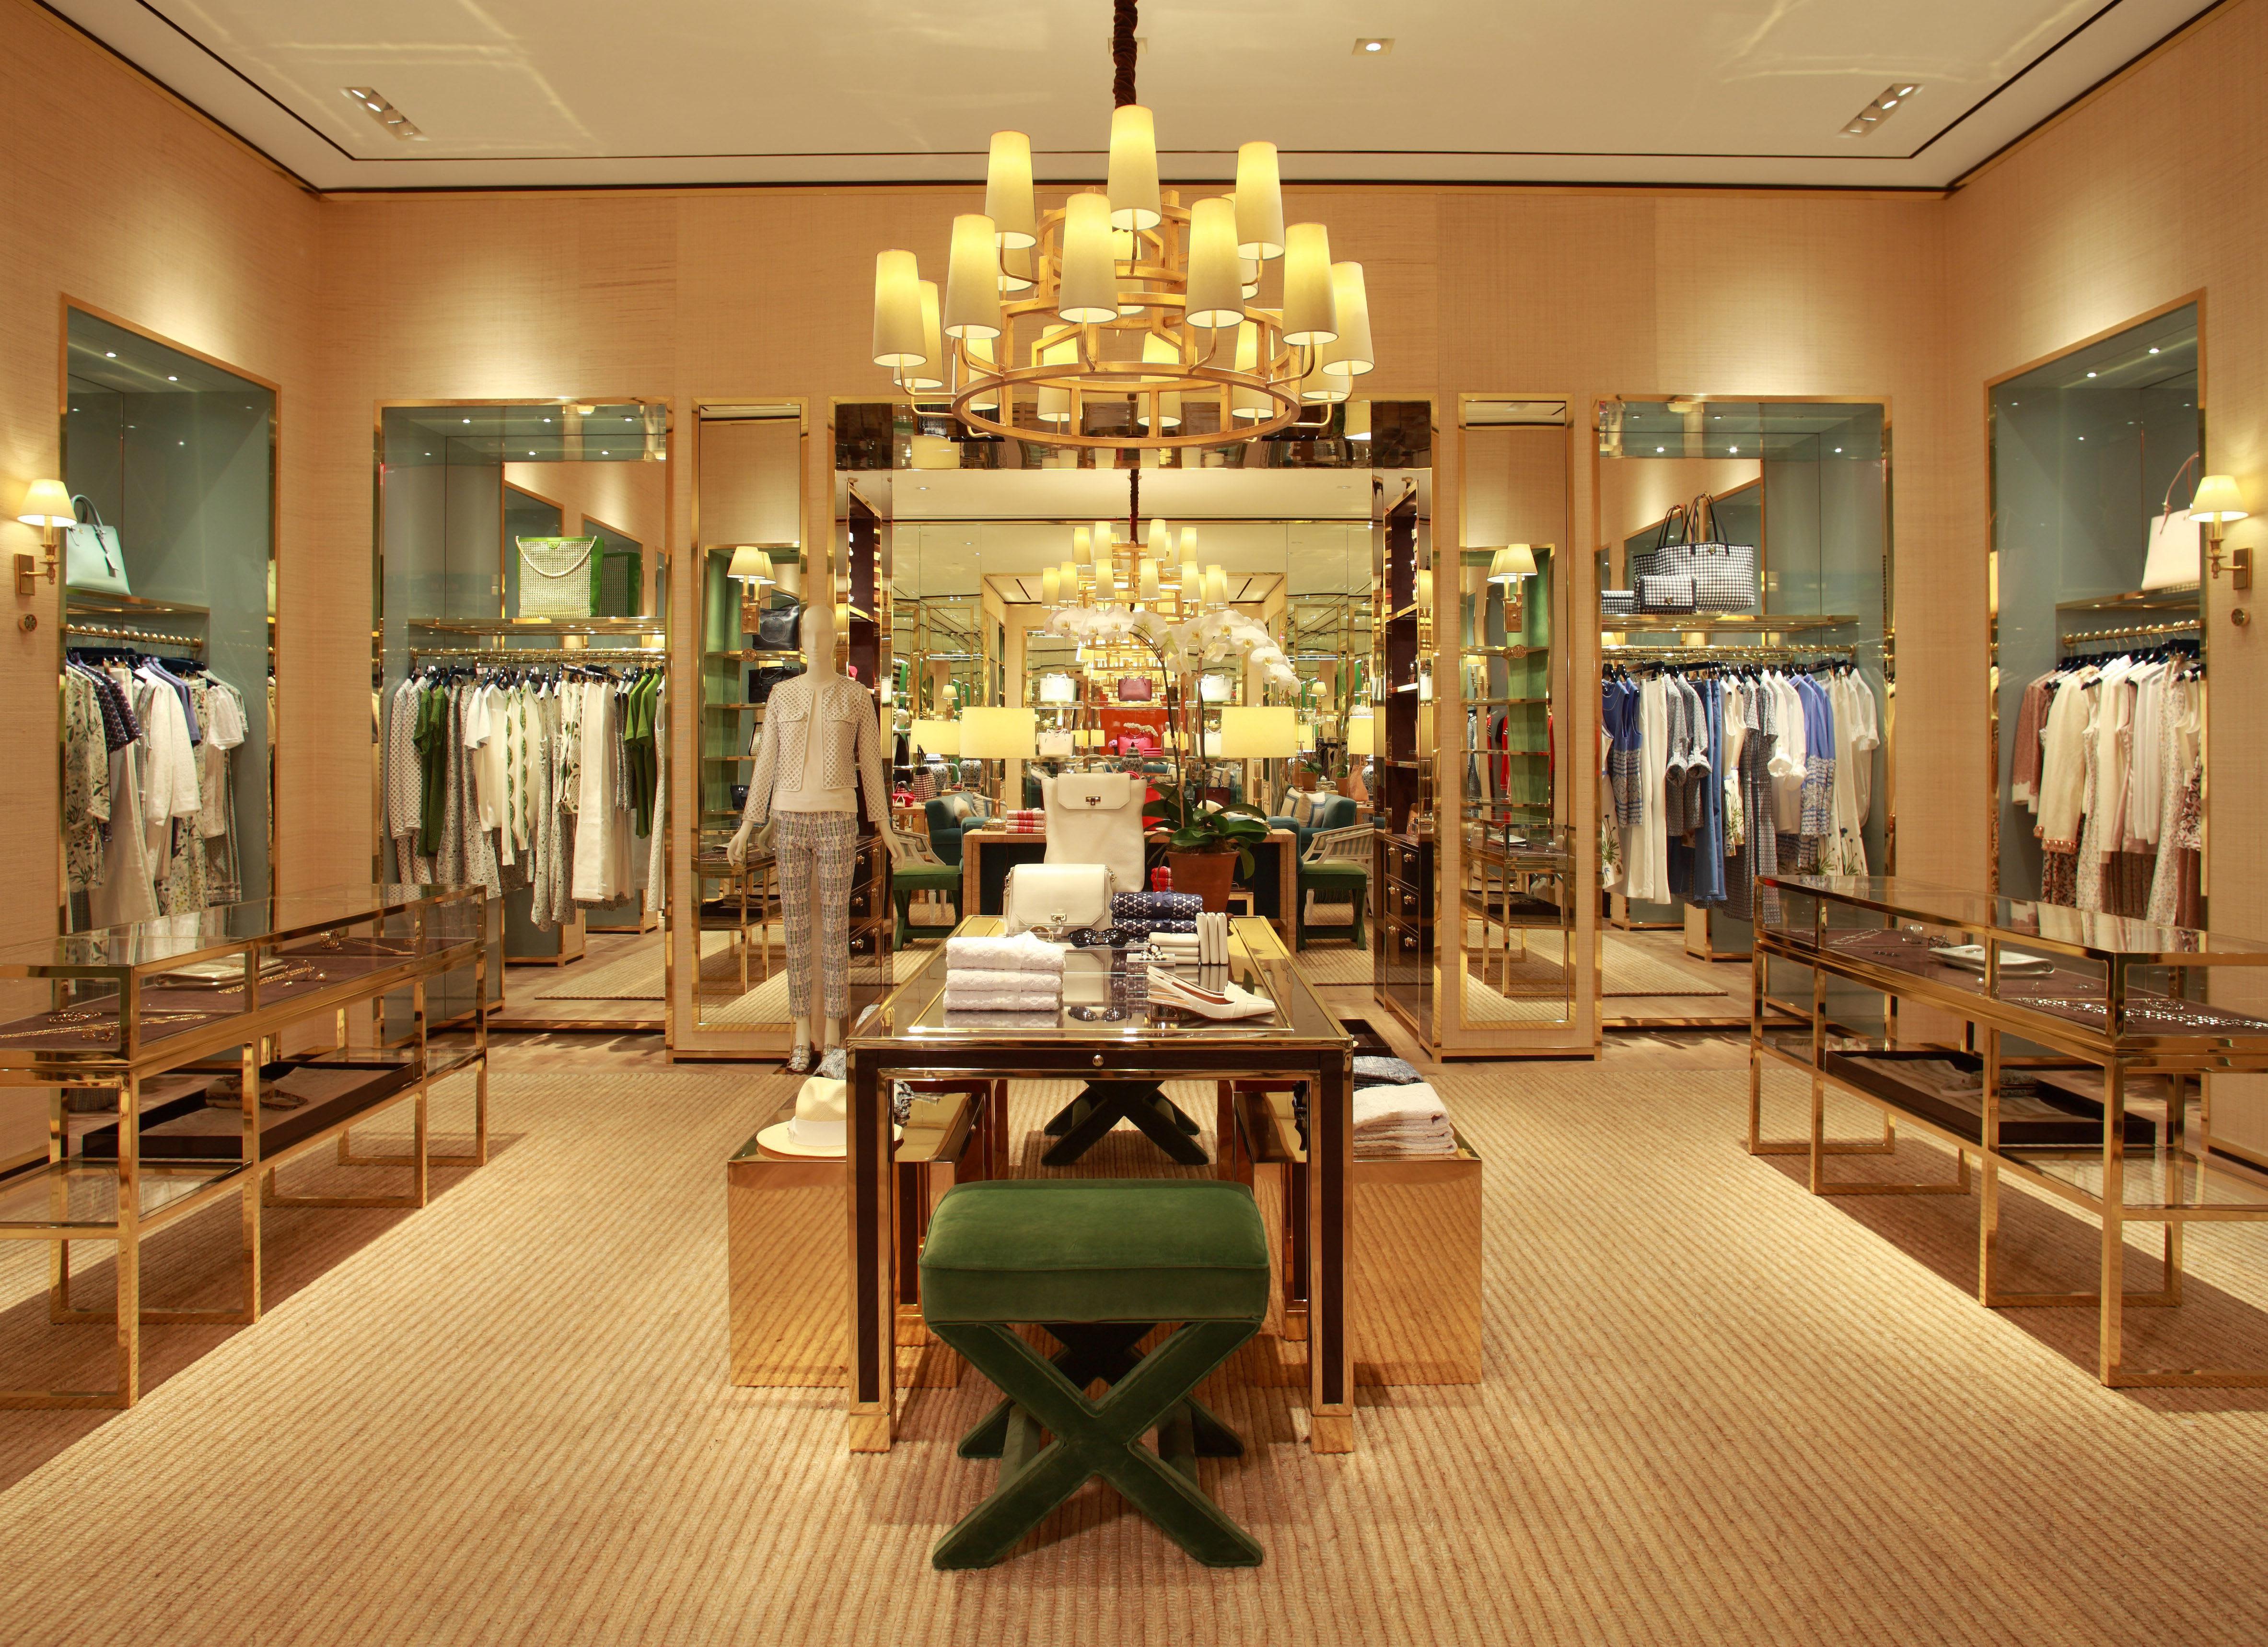 The Tory Burch store in the Galleria has doubled in size, with much more  room for the full range of clothing, shoes and accessories. - CultureMap  Houston